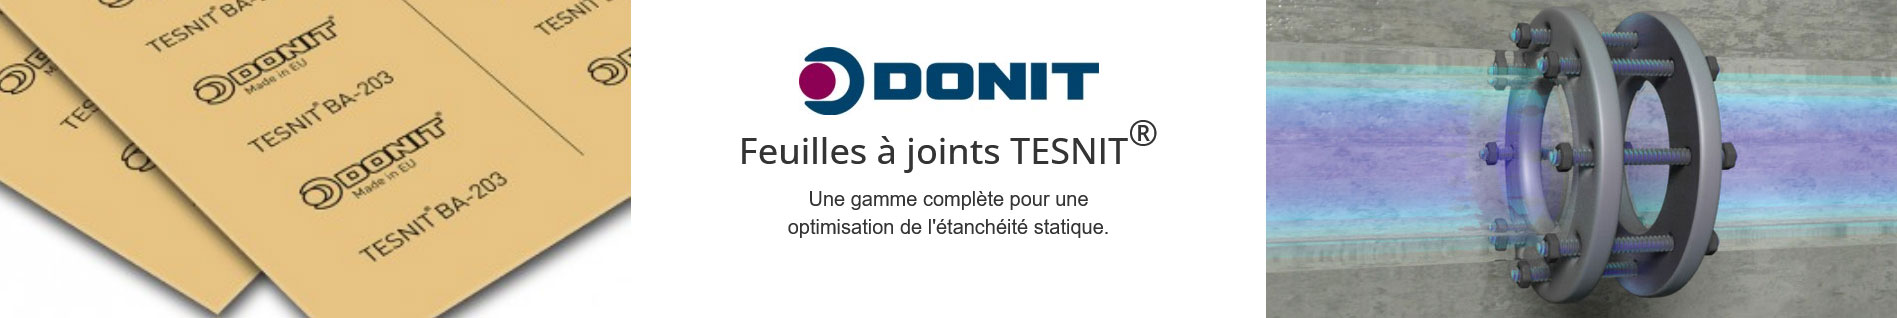 feuilles-a-joint-tesnit-fr